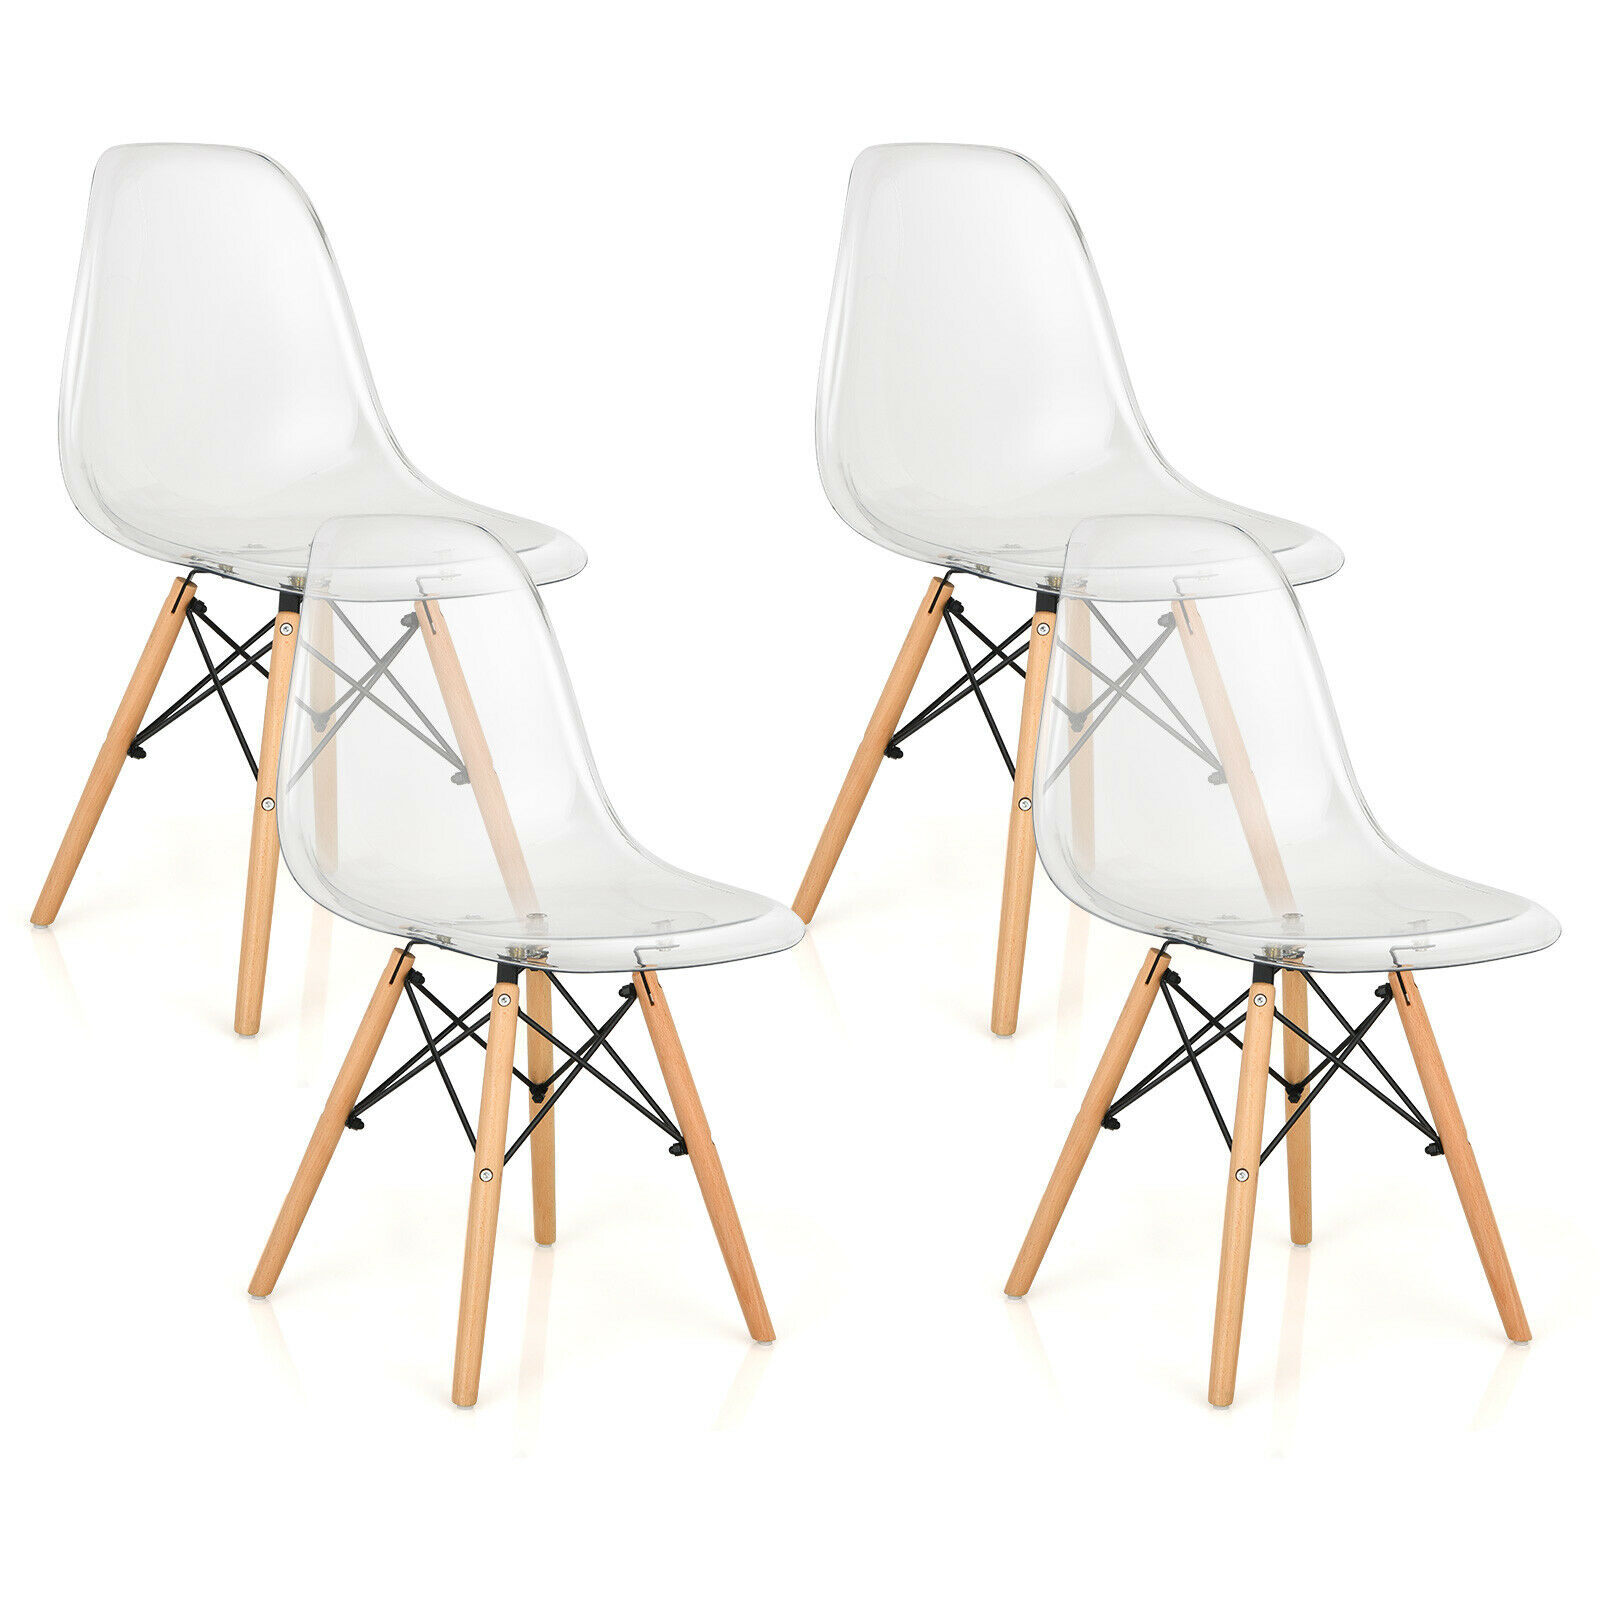 Costway Set of 4 Dining Chairs Modern Plastic Shell Side Chair w/ Clear Seat & Wood Legs